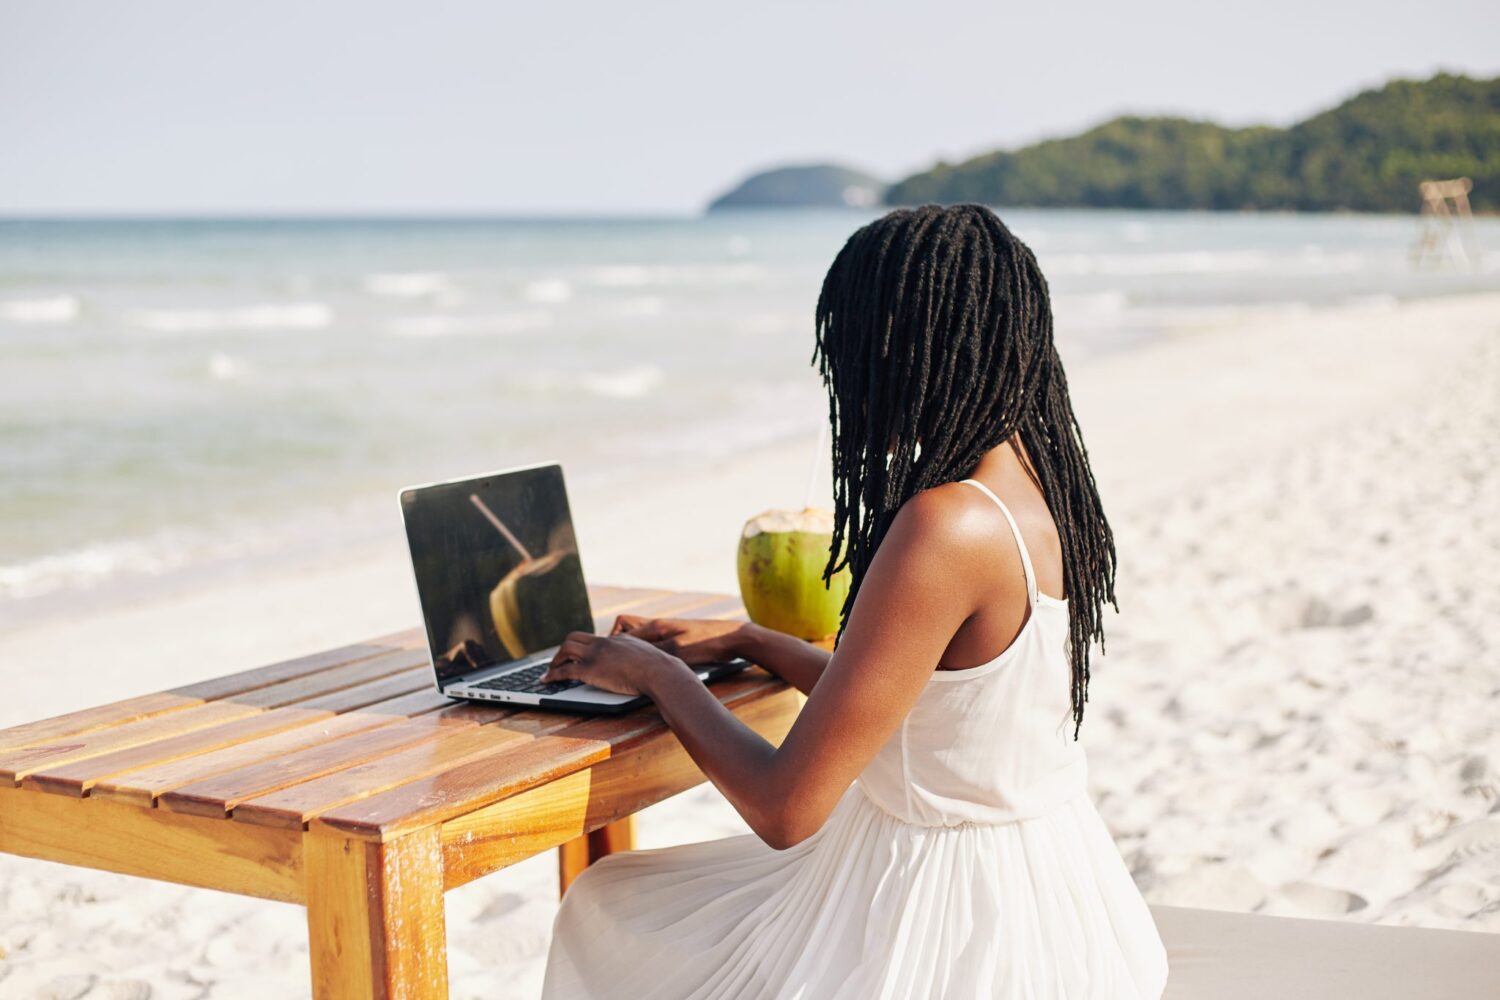 remote-worker-digital-nomad-on-beach-tax-savings-fusion-cpa